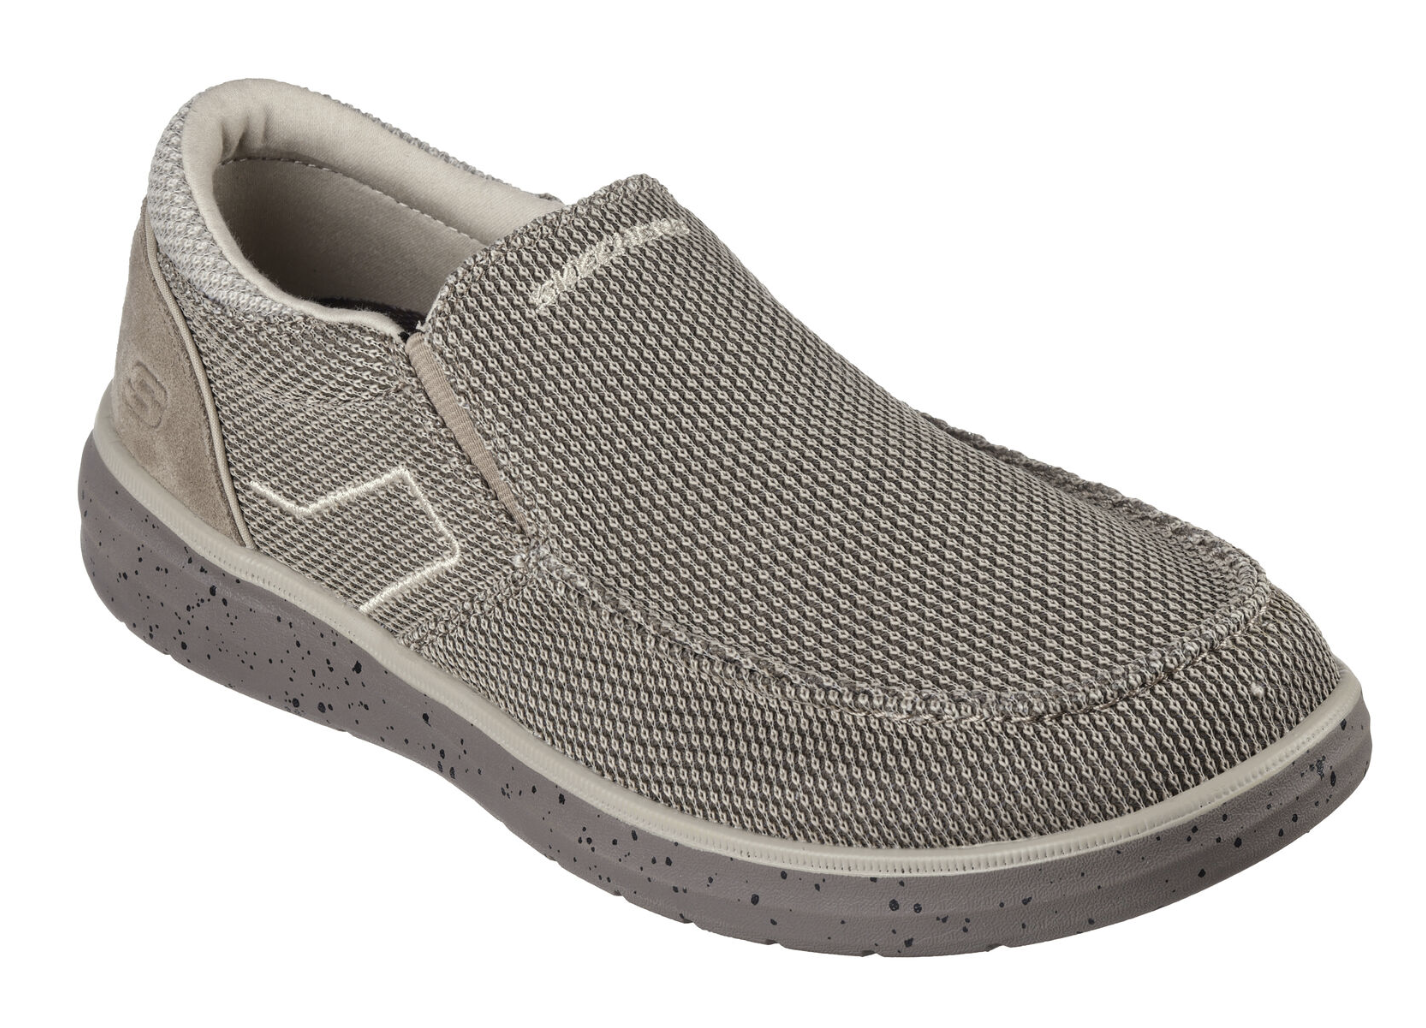 Skechers Relaxed Fit : Morelo-Port Viewer